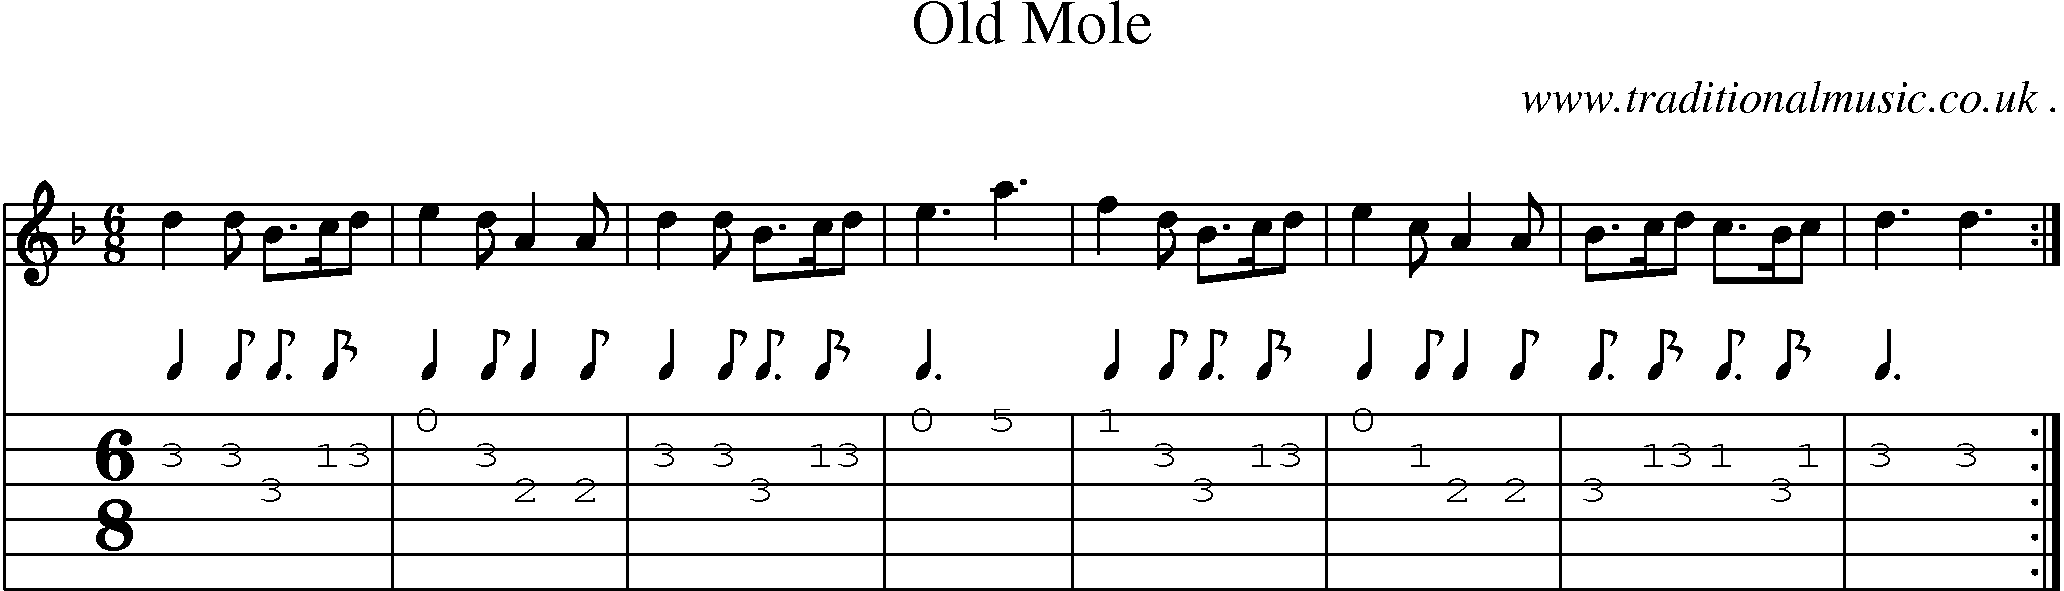 Sheet-Music and Guitar Tabs for Old Mole